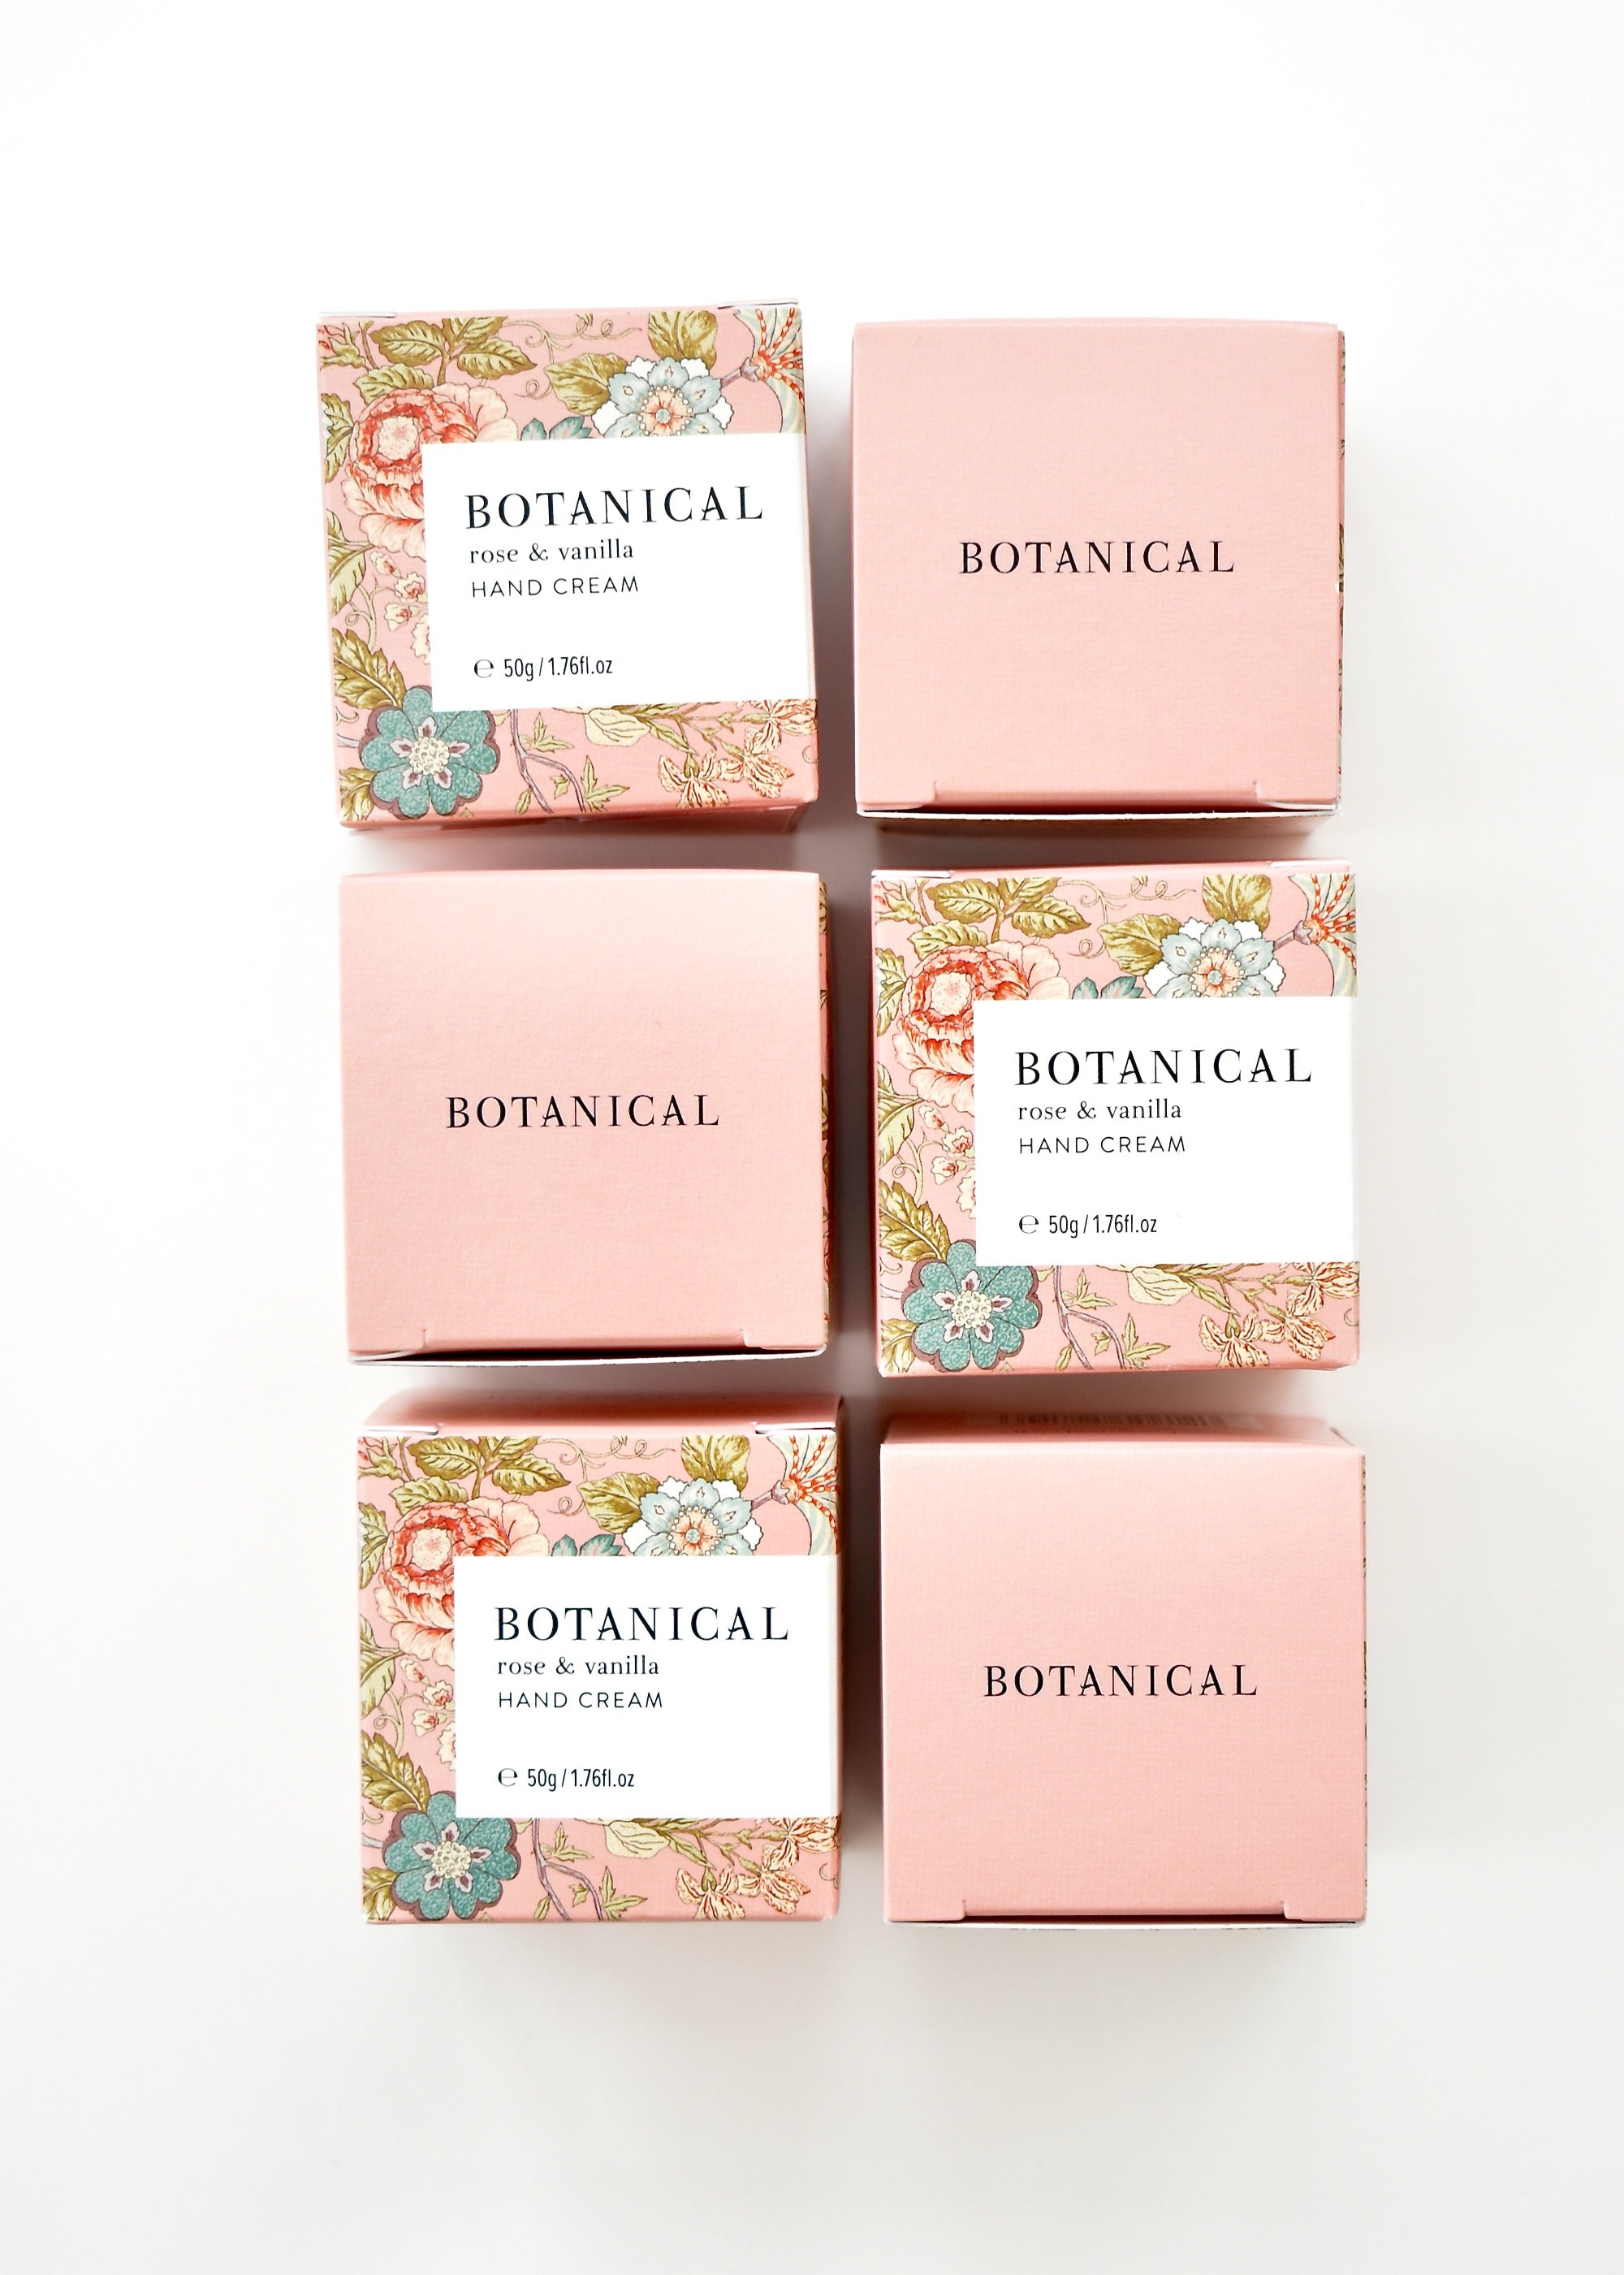 Pale pink floral boxes containing a jar of rose &amp; vanilla hand cream